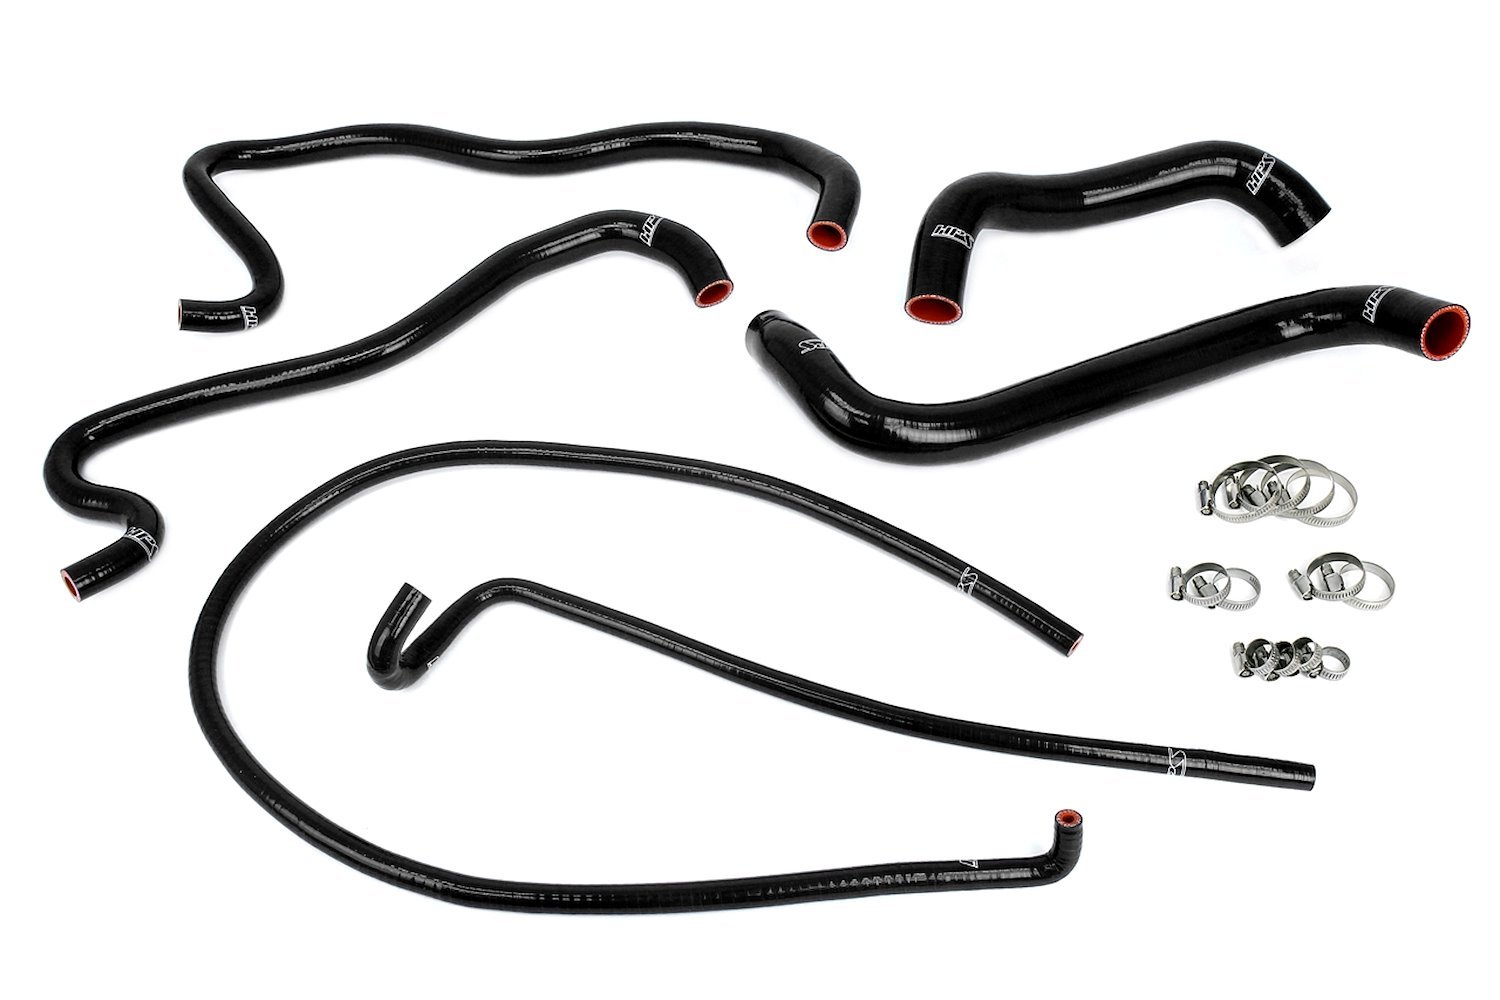 57-1861-BLK Radiator and Heater Hose Kit, 3-Ply Reinforced Silicone, Replaces Rubber Radiator & Heater Hoses